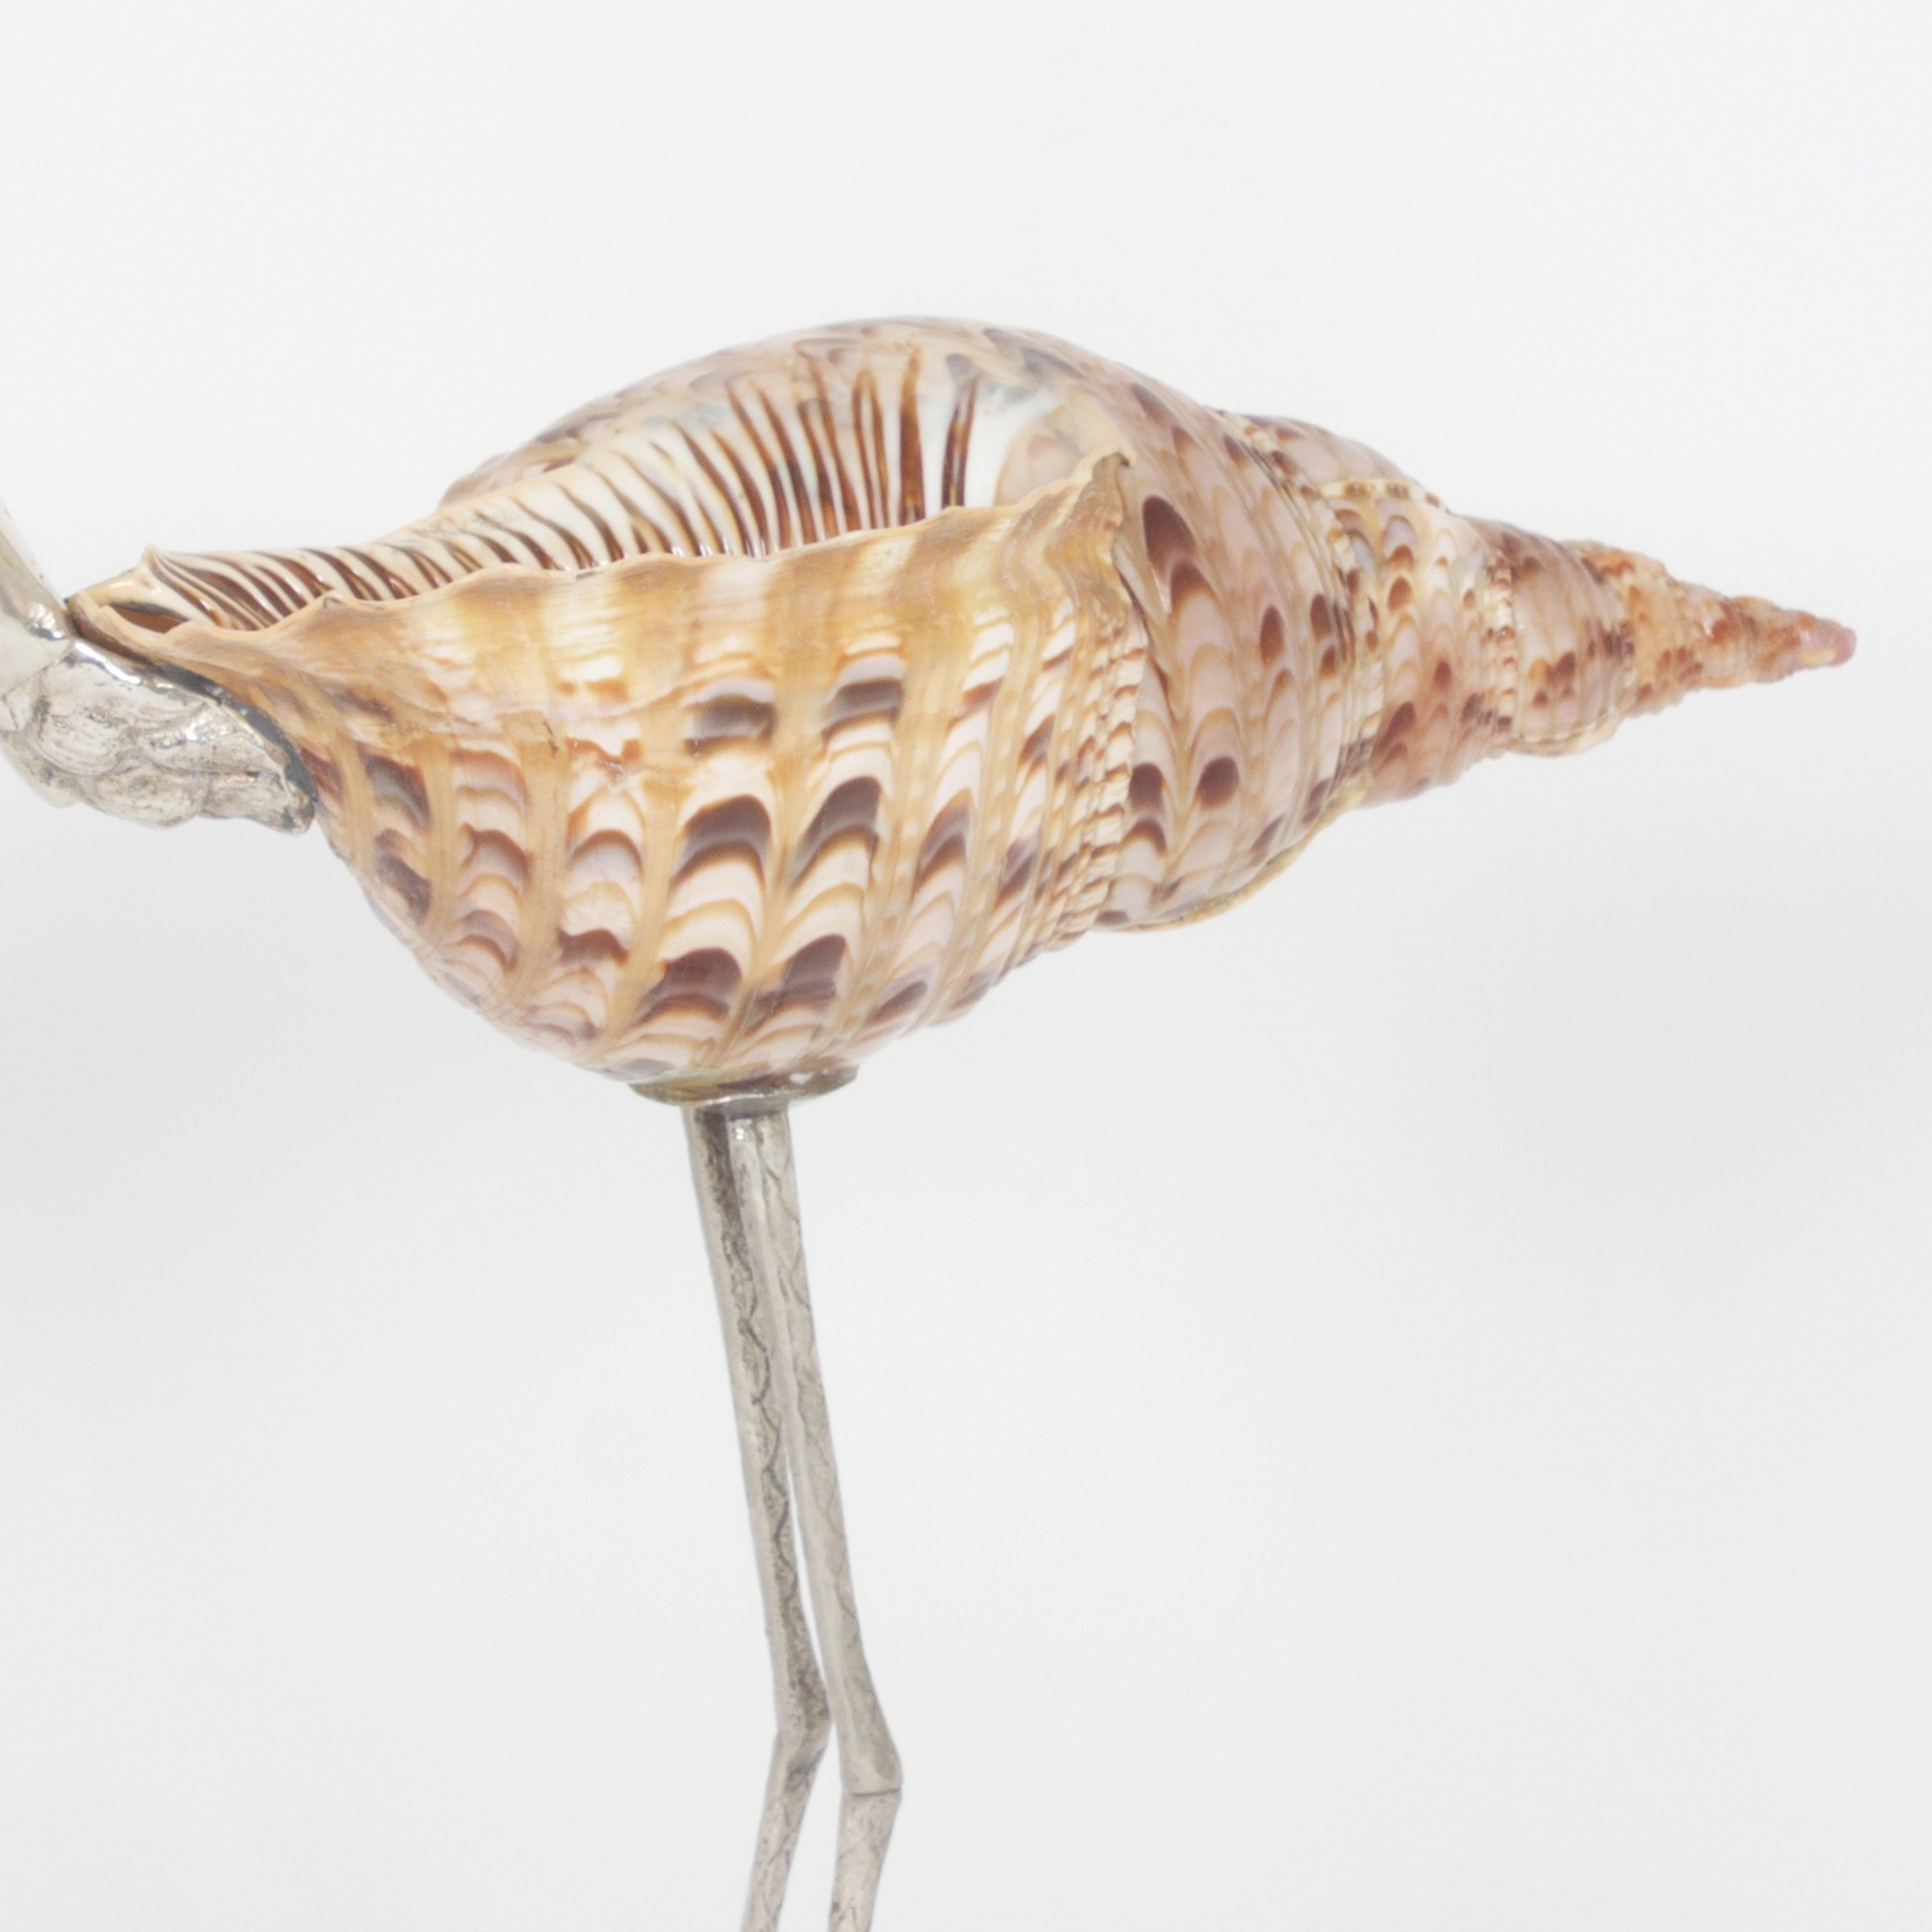 Italian Vintage Midcentury Bird with Shell Sculpture by Binazzi